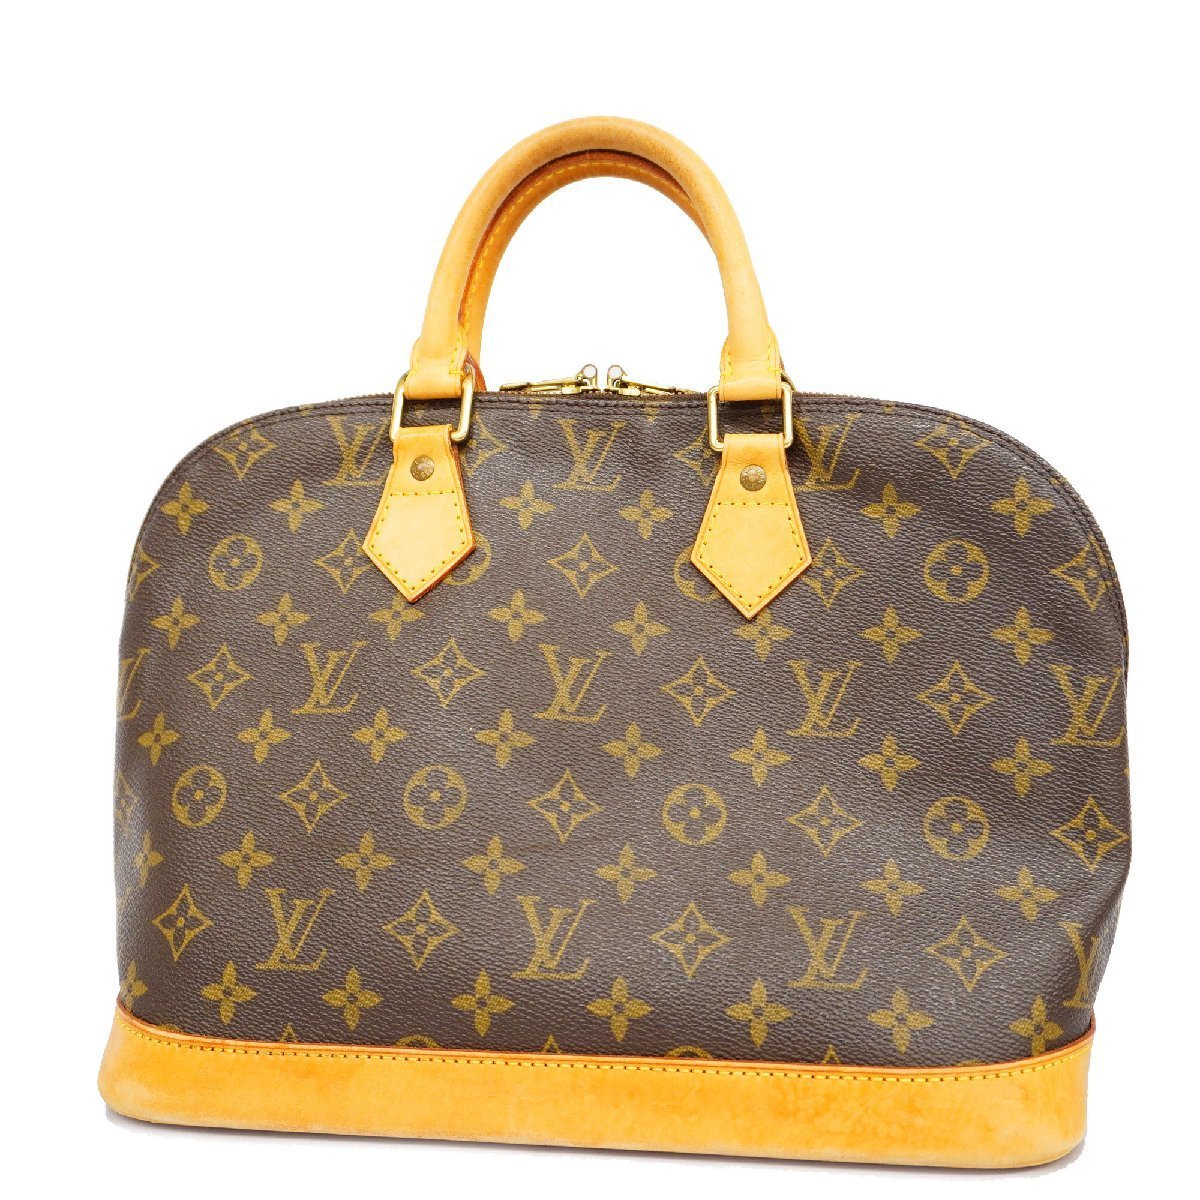 Louis Vuitton Alma BB Epi leather full review + wear and tear +